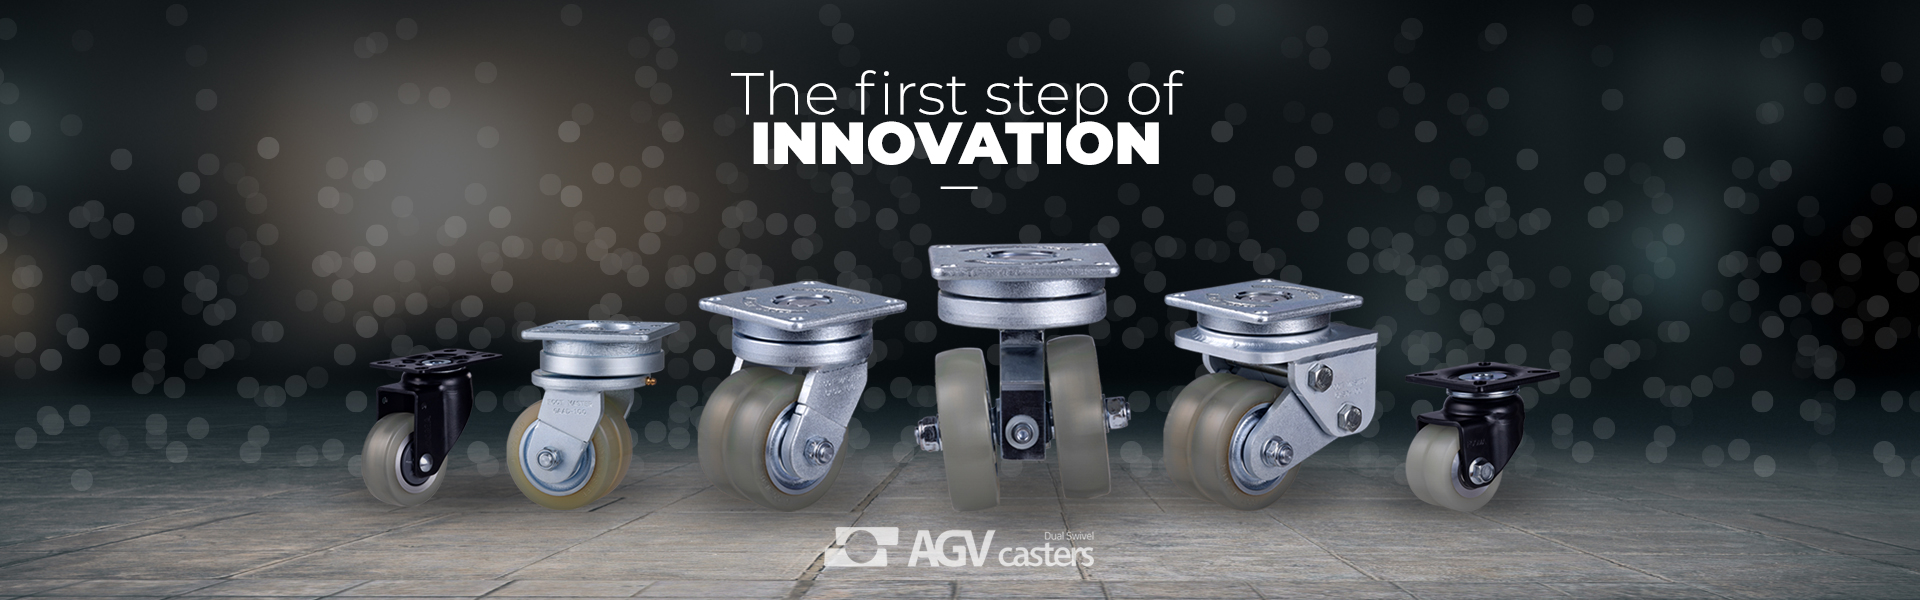 FOOT MASTER AGV Casters, The first step of Innovation